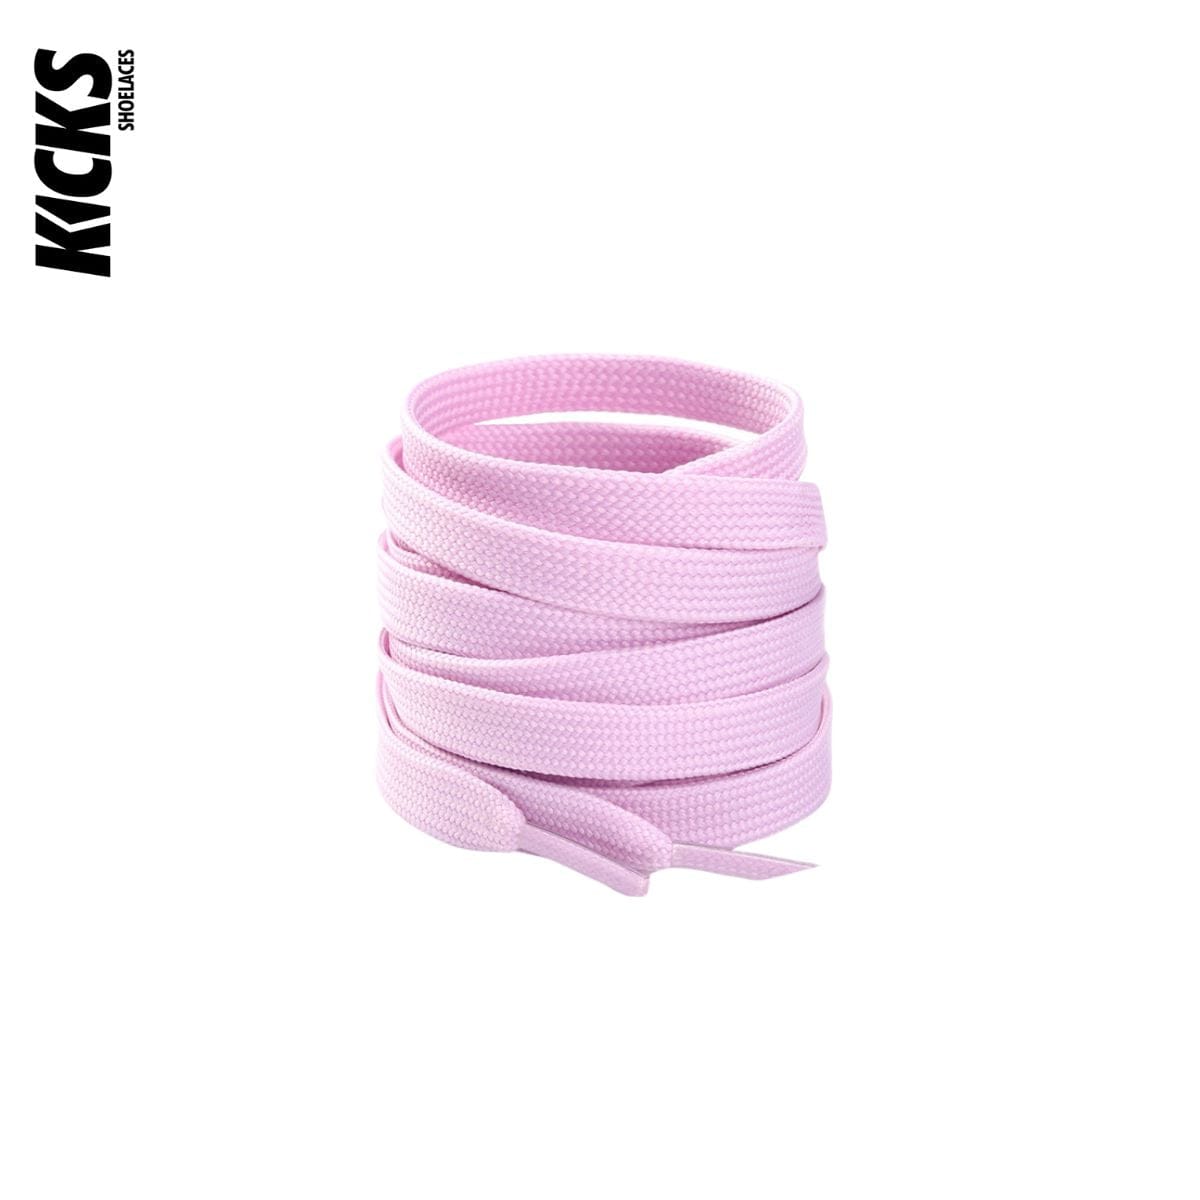 Pastel Purple Replacement Shoe Laces for Adidas NMD Sneakers by Kicks Shoelaces